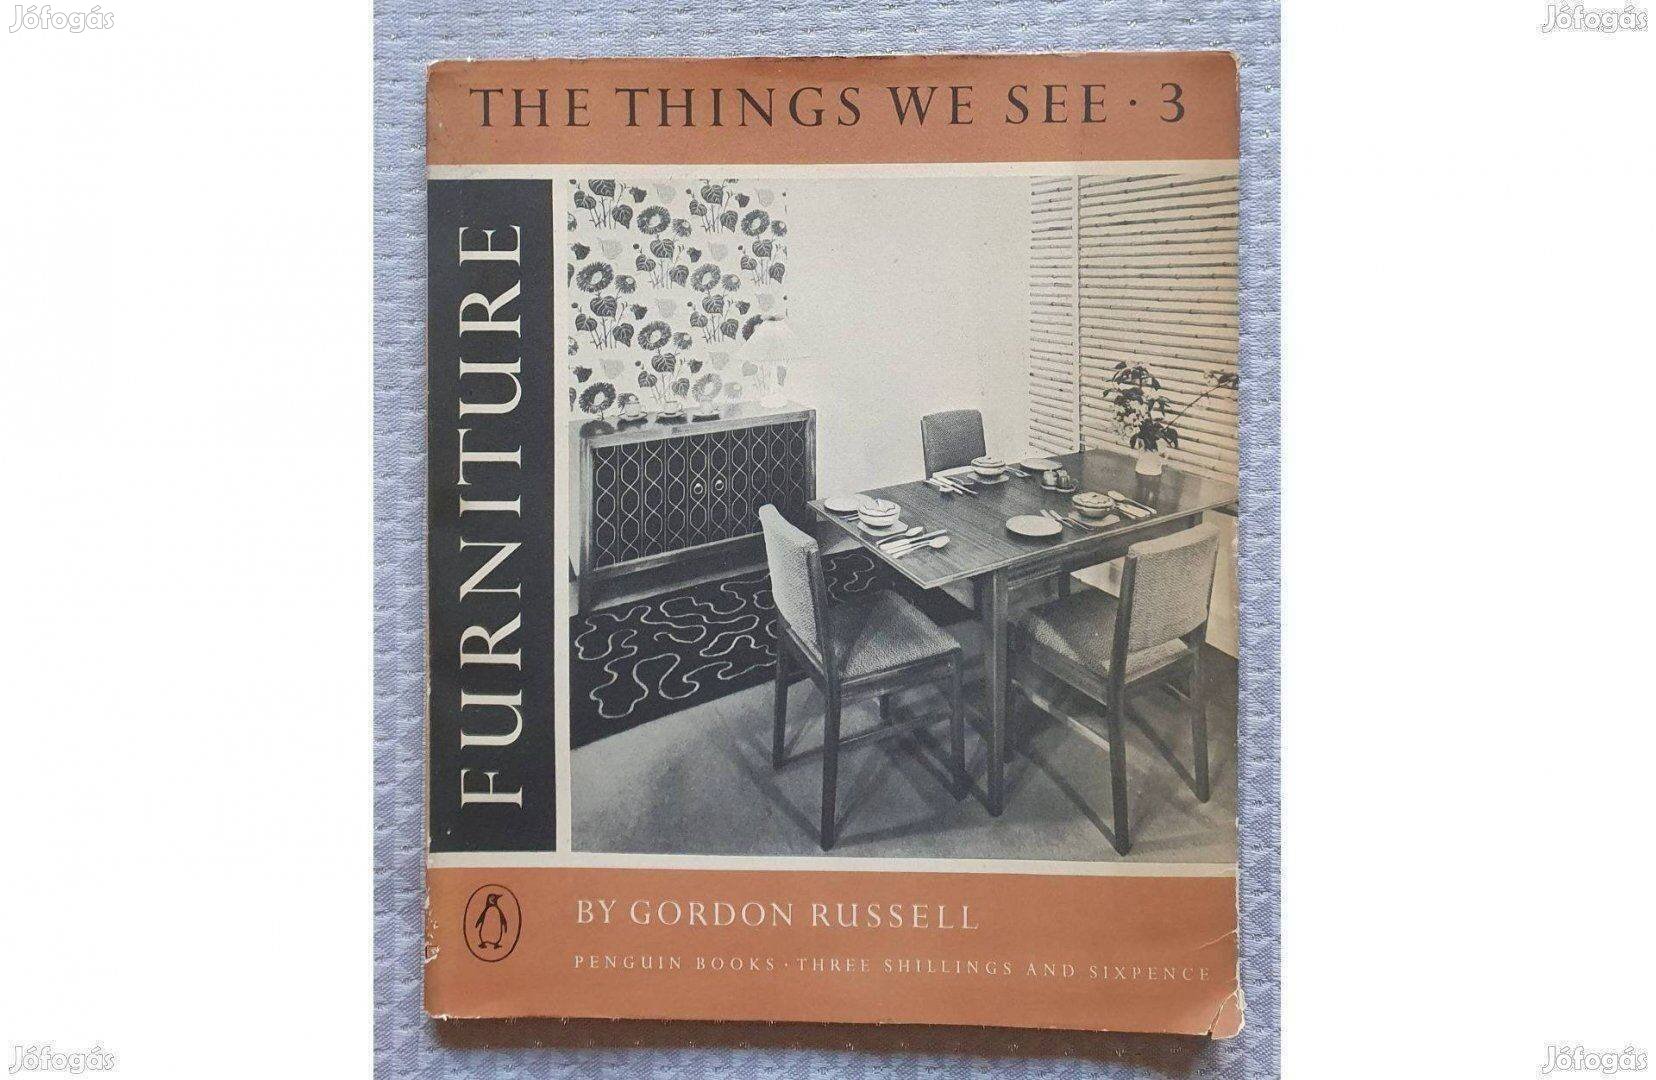 Gordon Russell: The Things We See - Furniture 1953